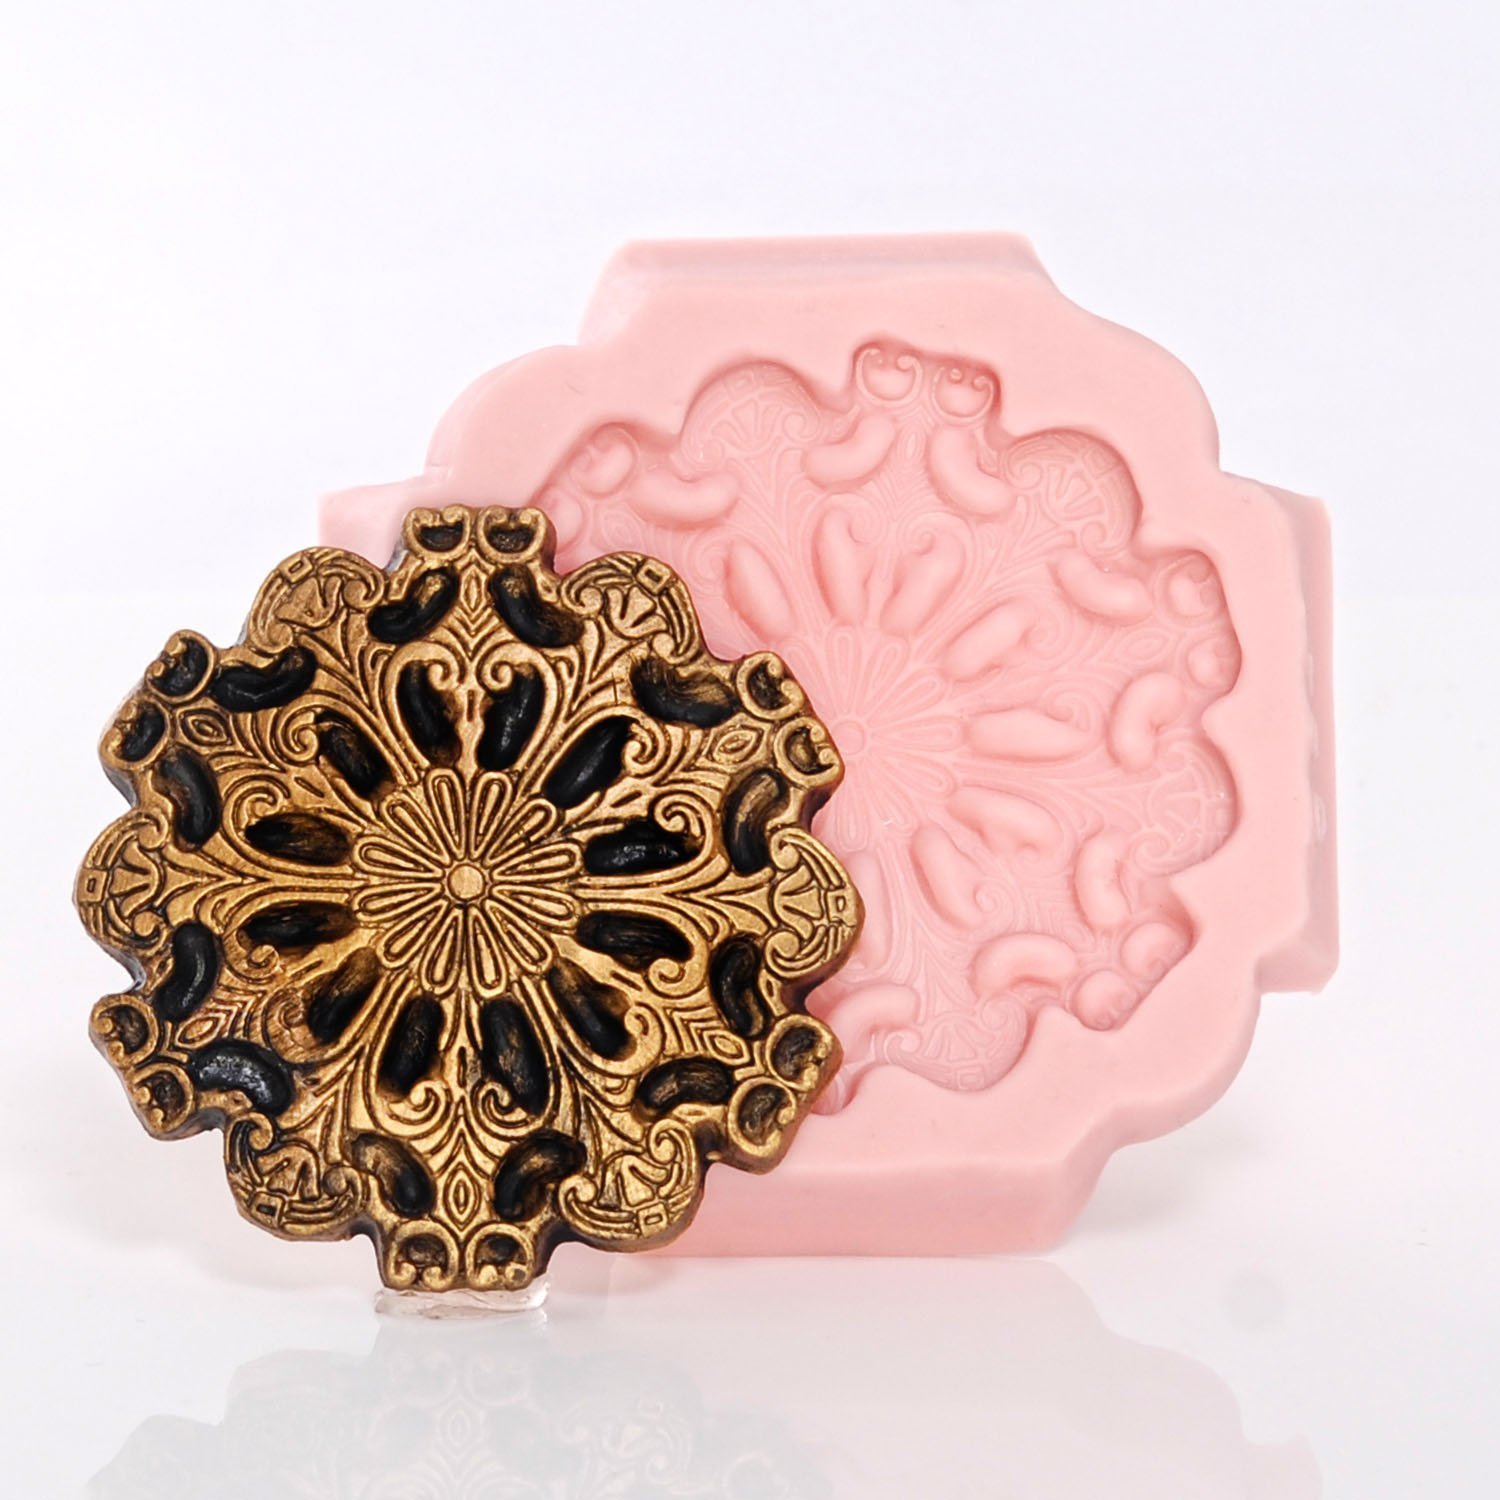 Round Steampunk Medallion Mold Easy To Use Flexible Silicone Food Safe Fondant, Chocolate, Candy, Resin, Polymer Clay Push Mold.